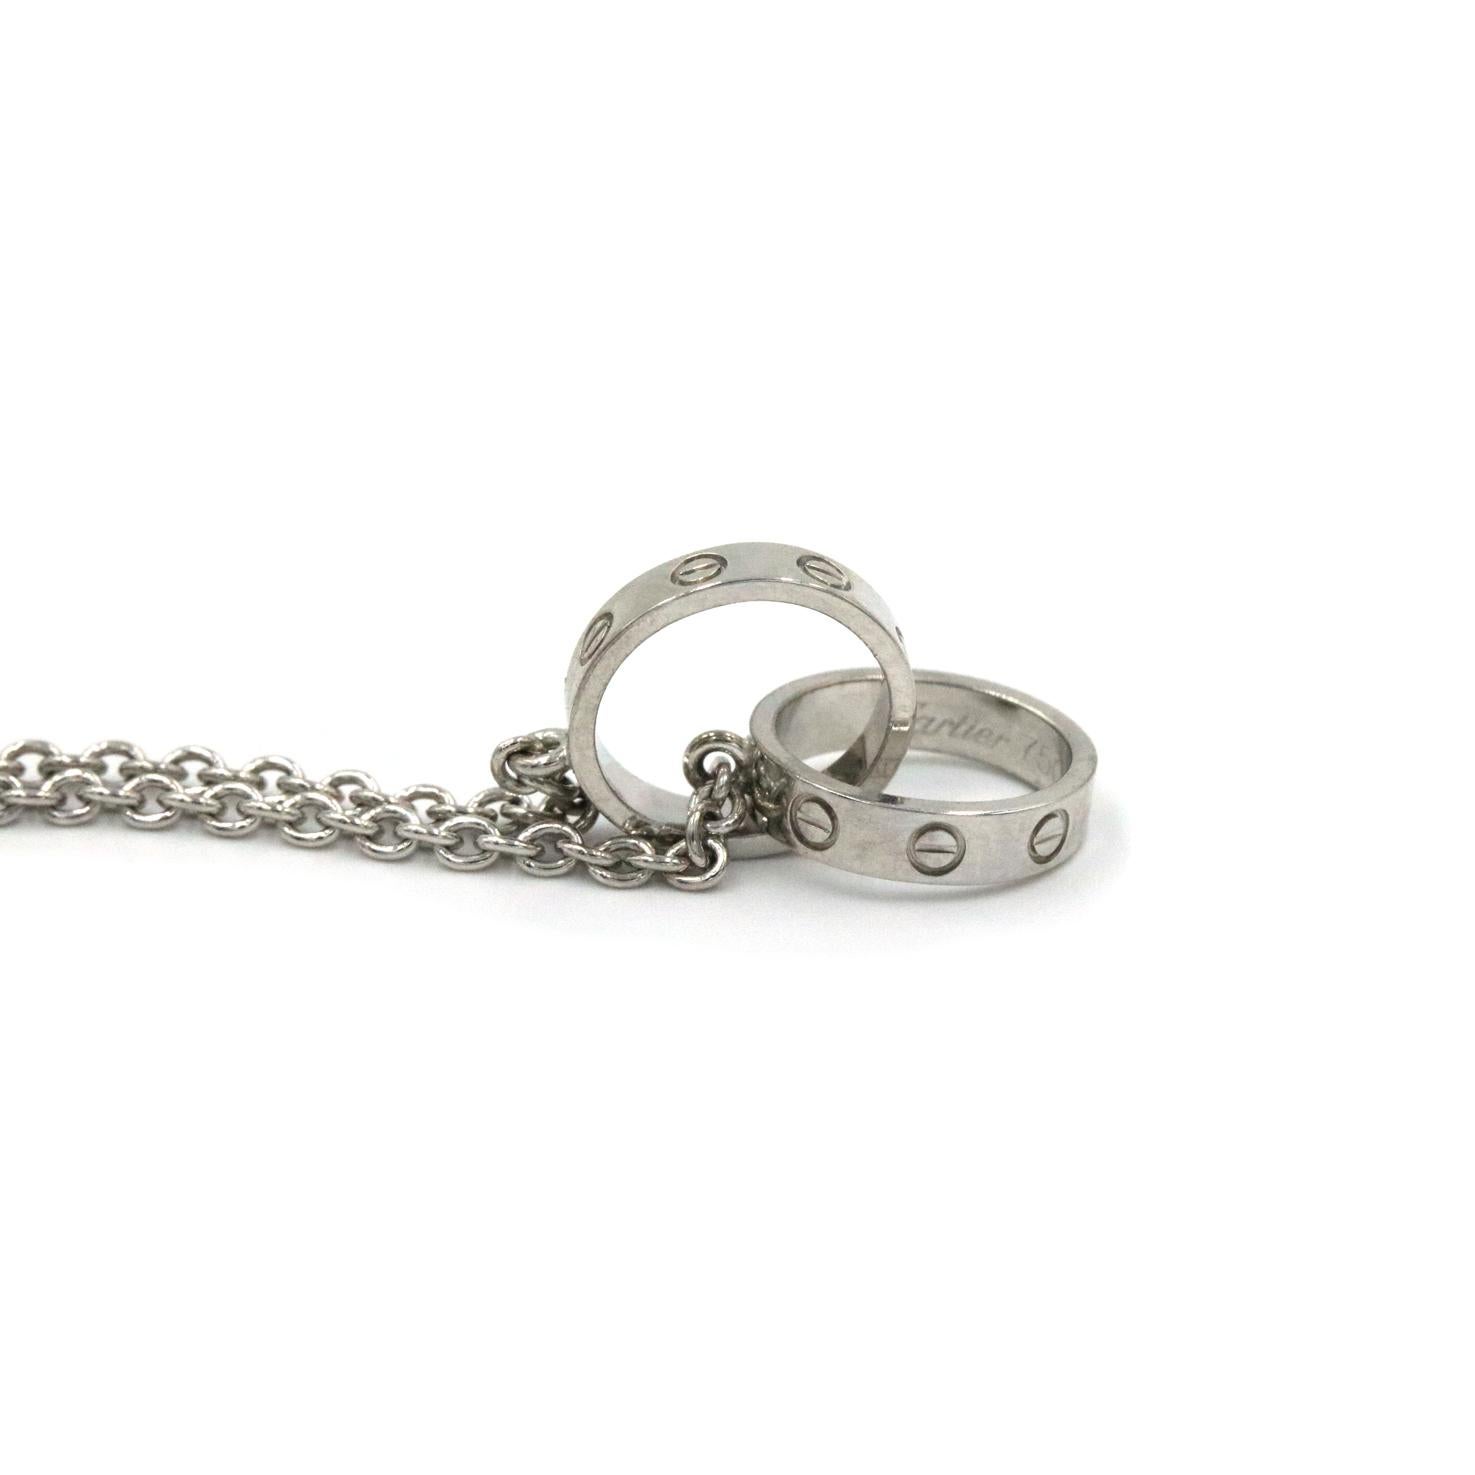 Cartier Baby Love Necklace In 18K White Gold. This Necklace Has 2 interlocking Love Rings On A 16